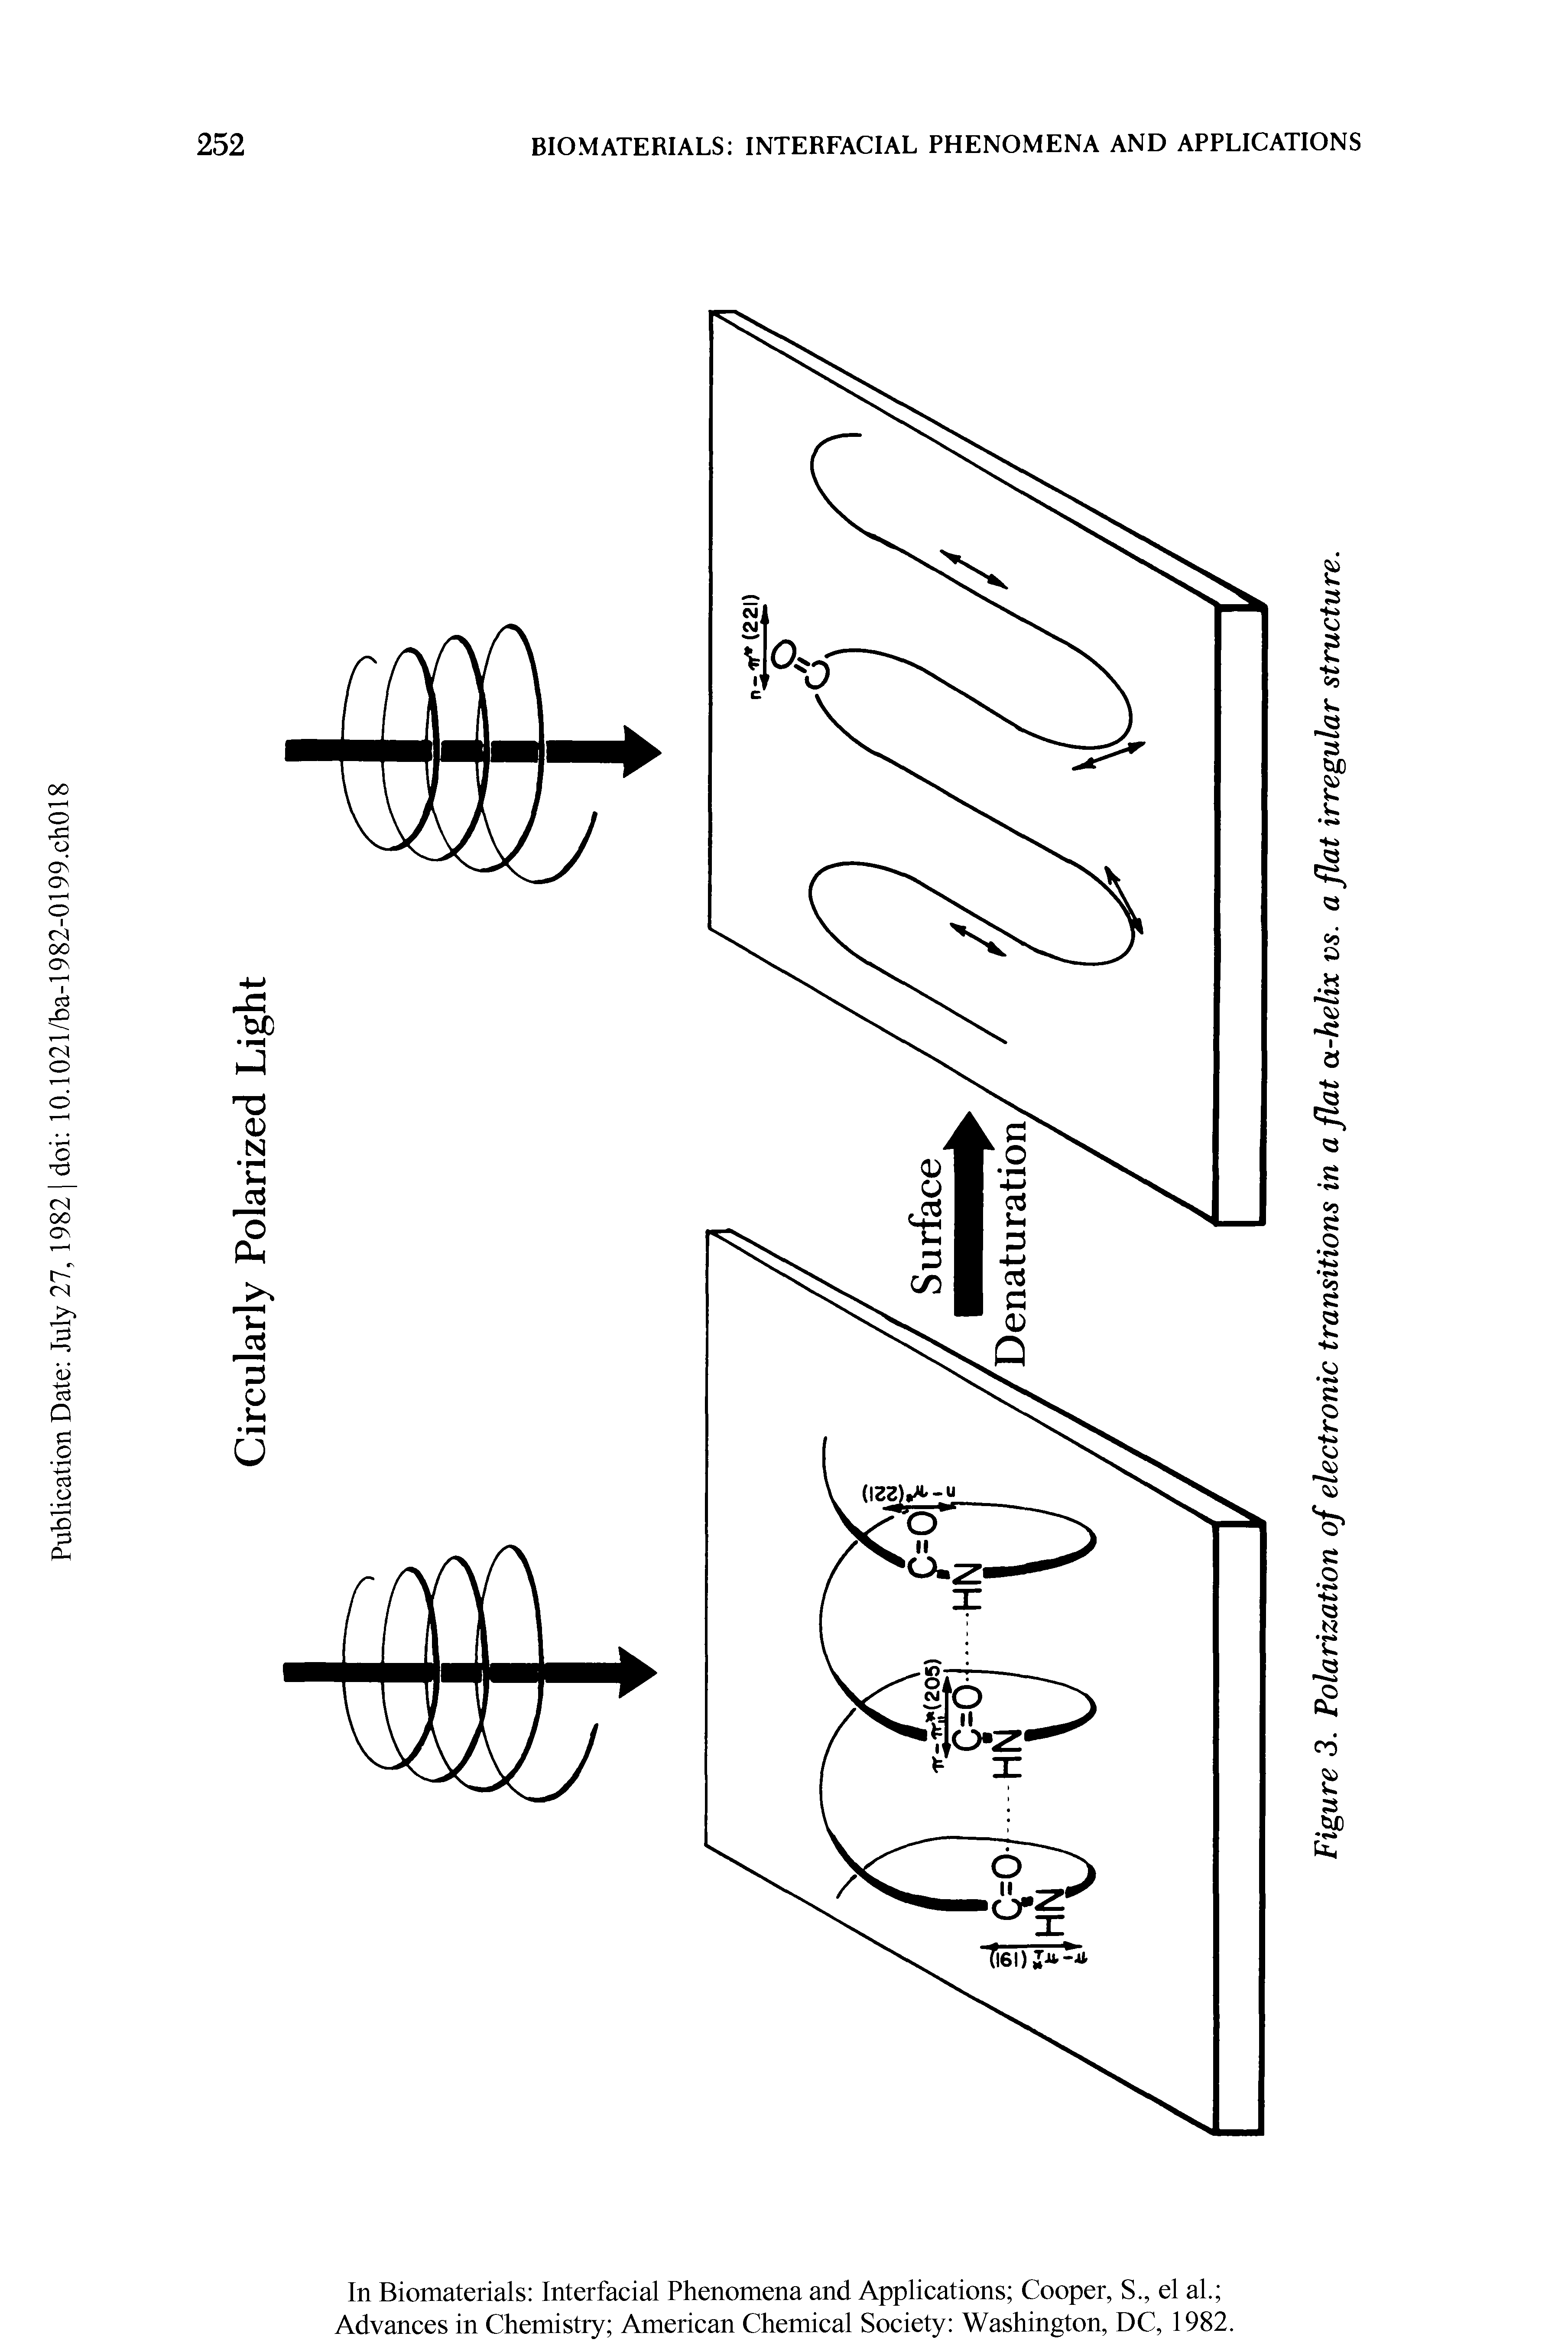 Figure 3. Polarization of electronic transitions in a flat a-helix vs. a flat irregular structure.